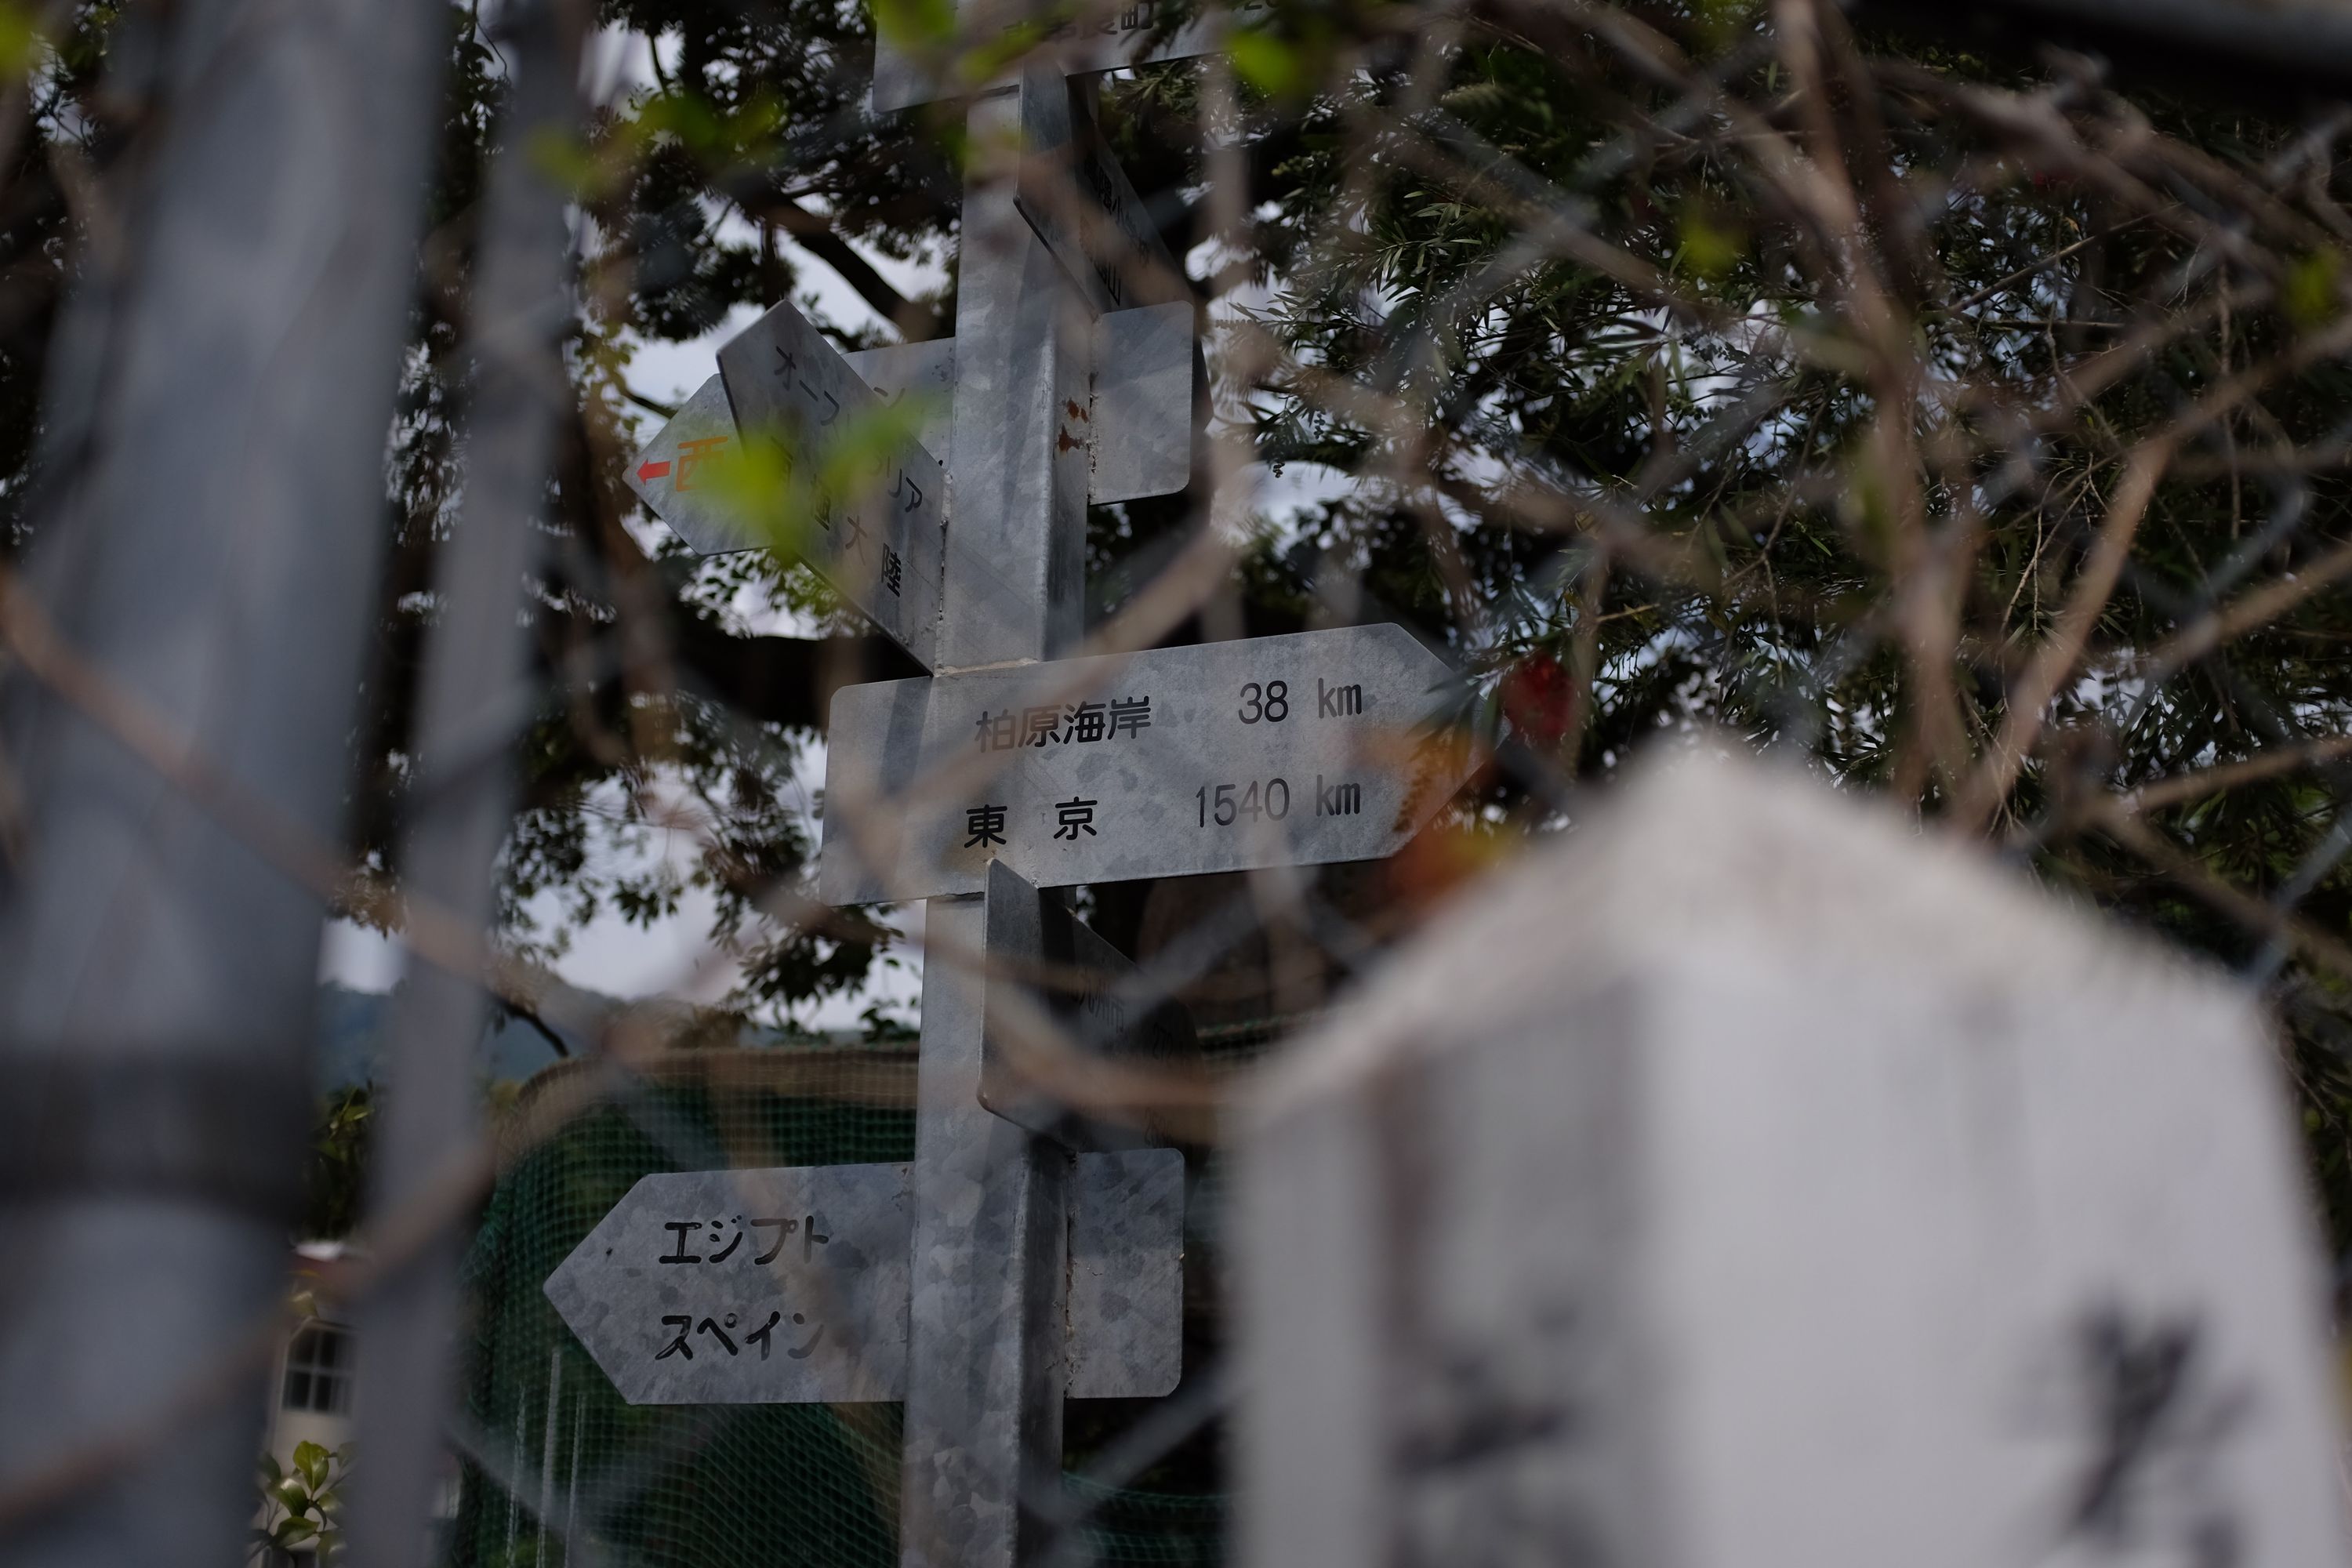 A sign behind a fence shows the distance to the nearest town, and also to Tokyo, 1540 kilometers away.